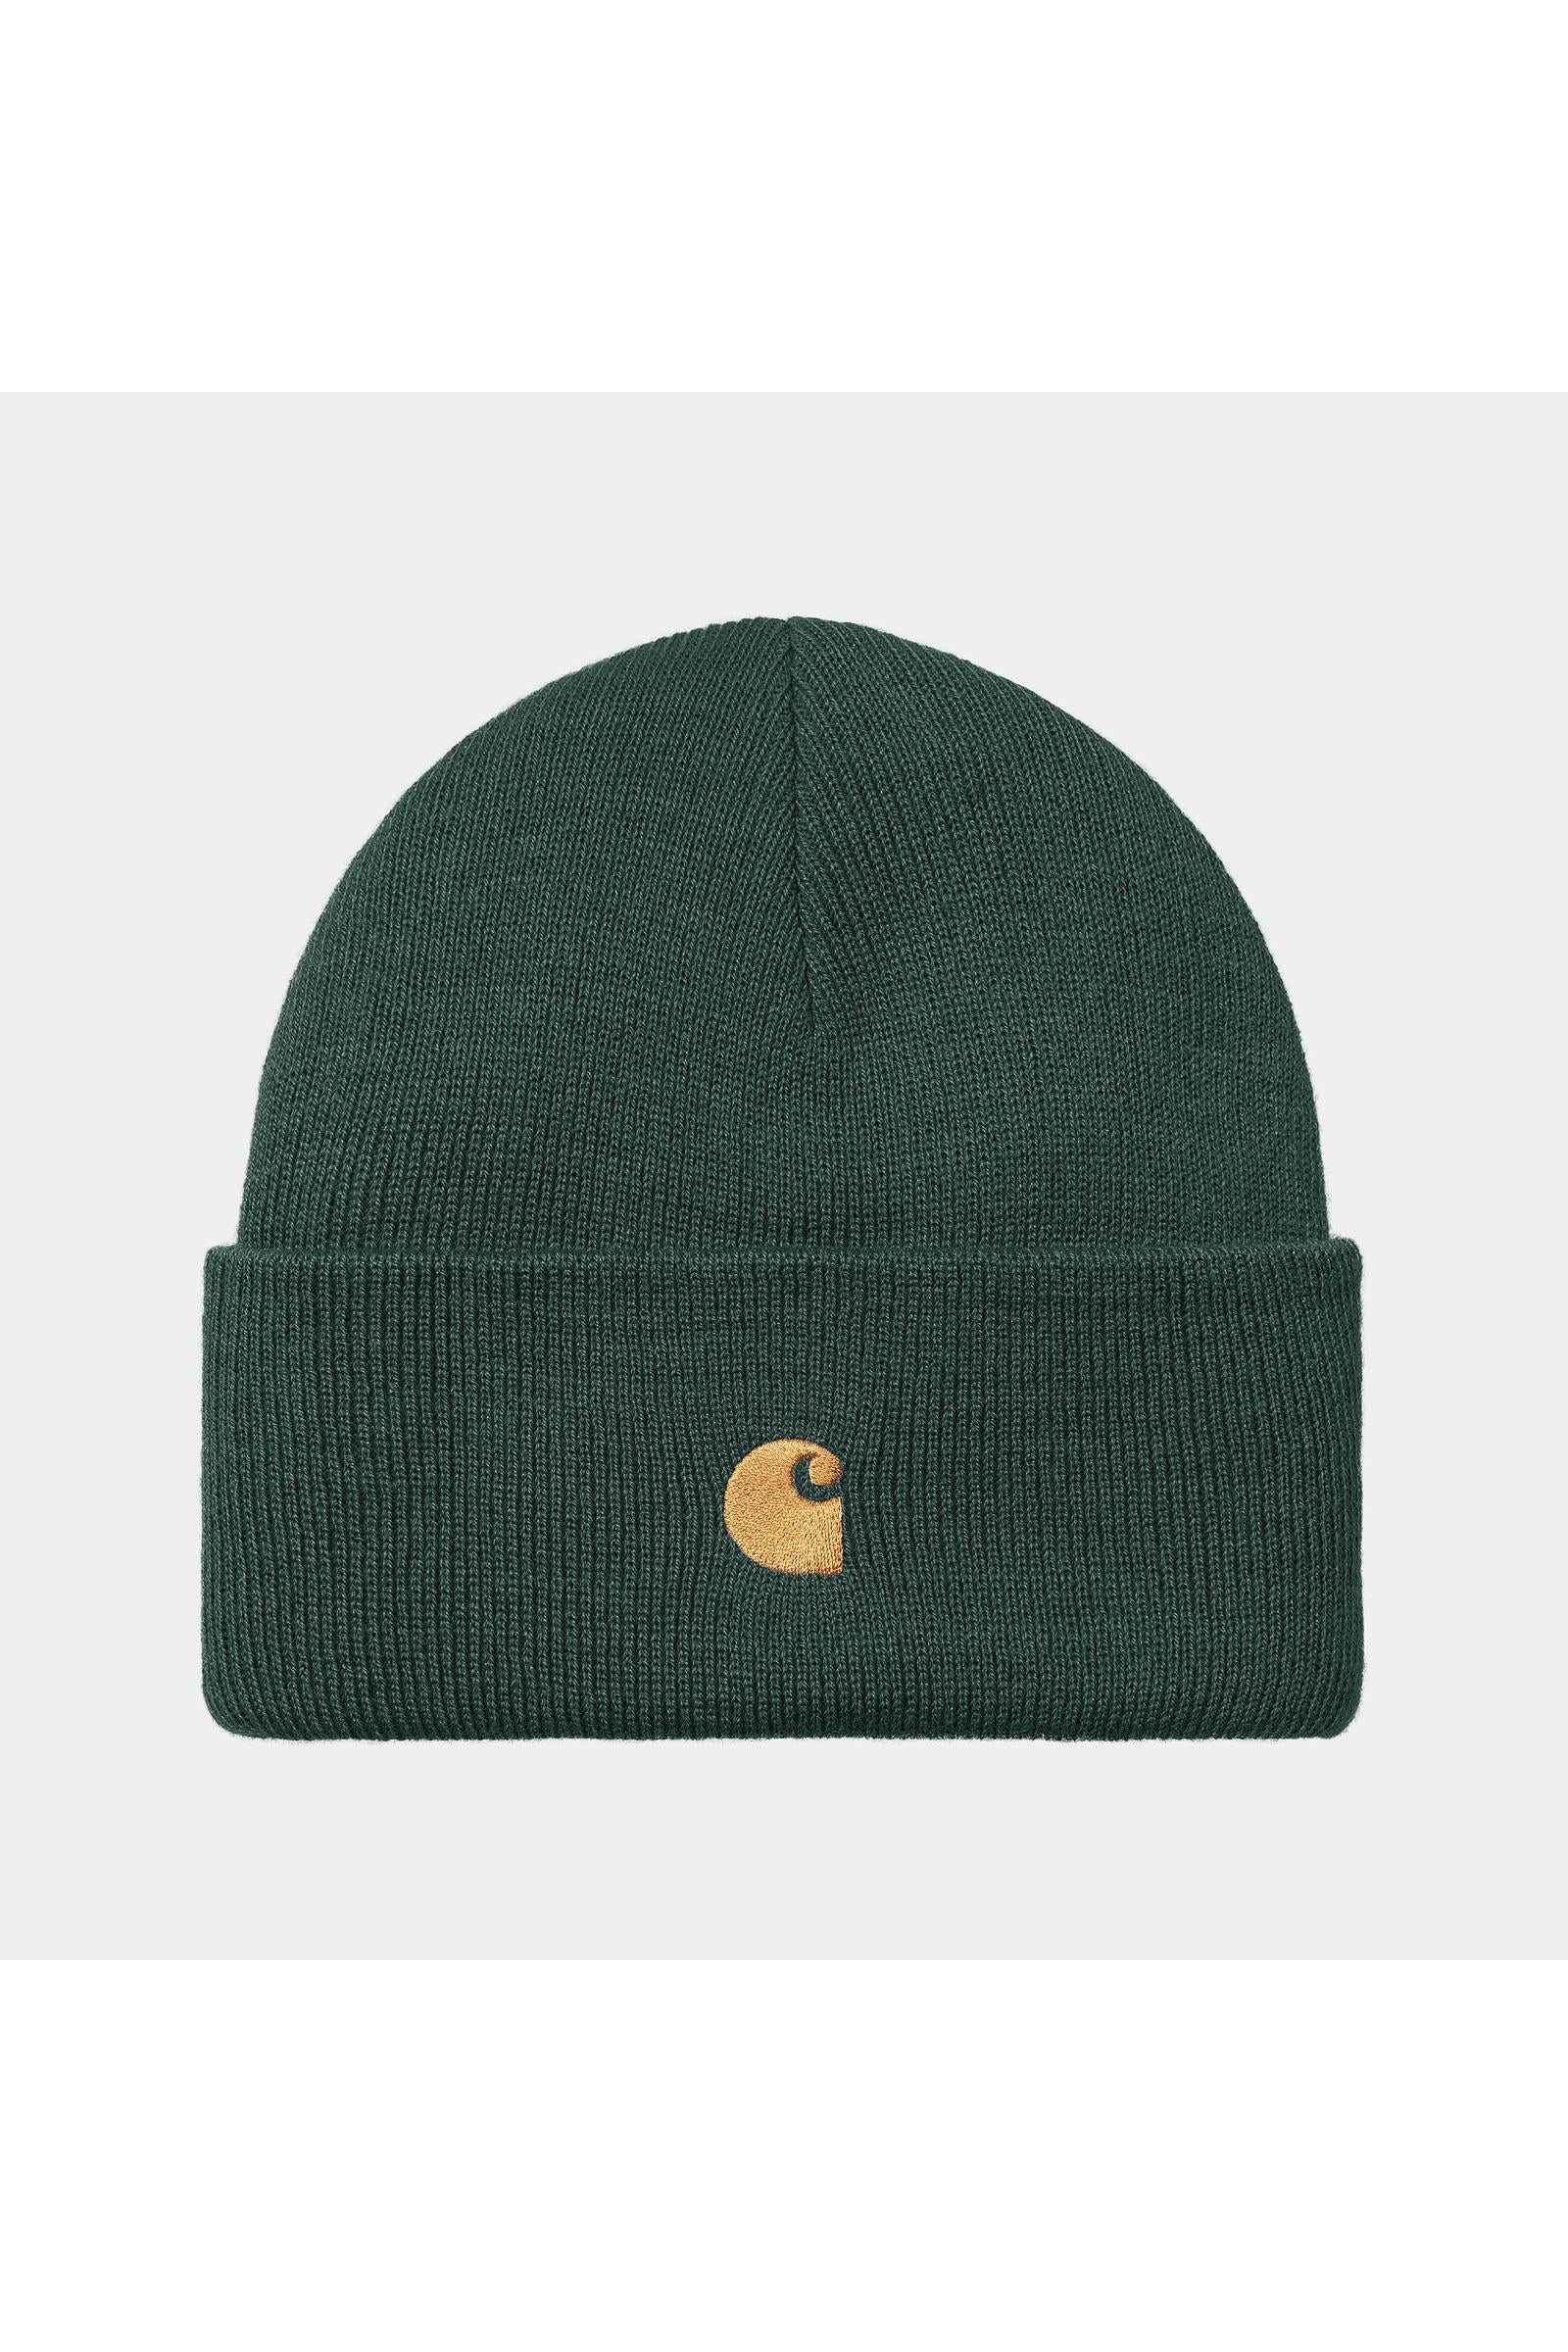 Chase Beanie-Discovery Green / Gold-Front View